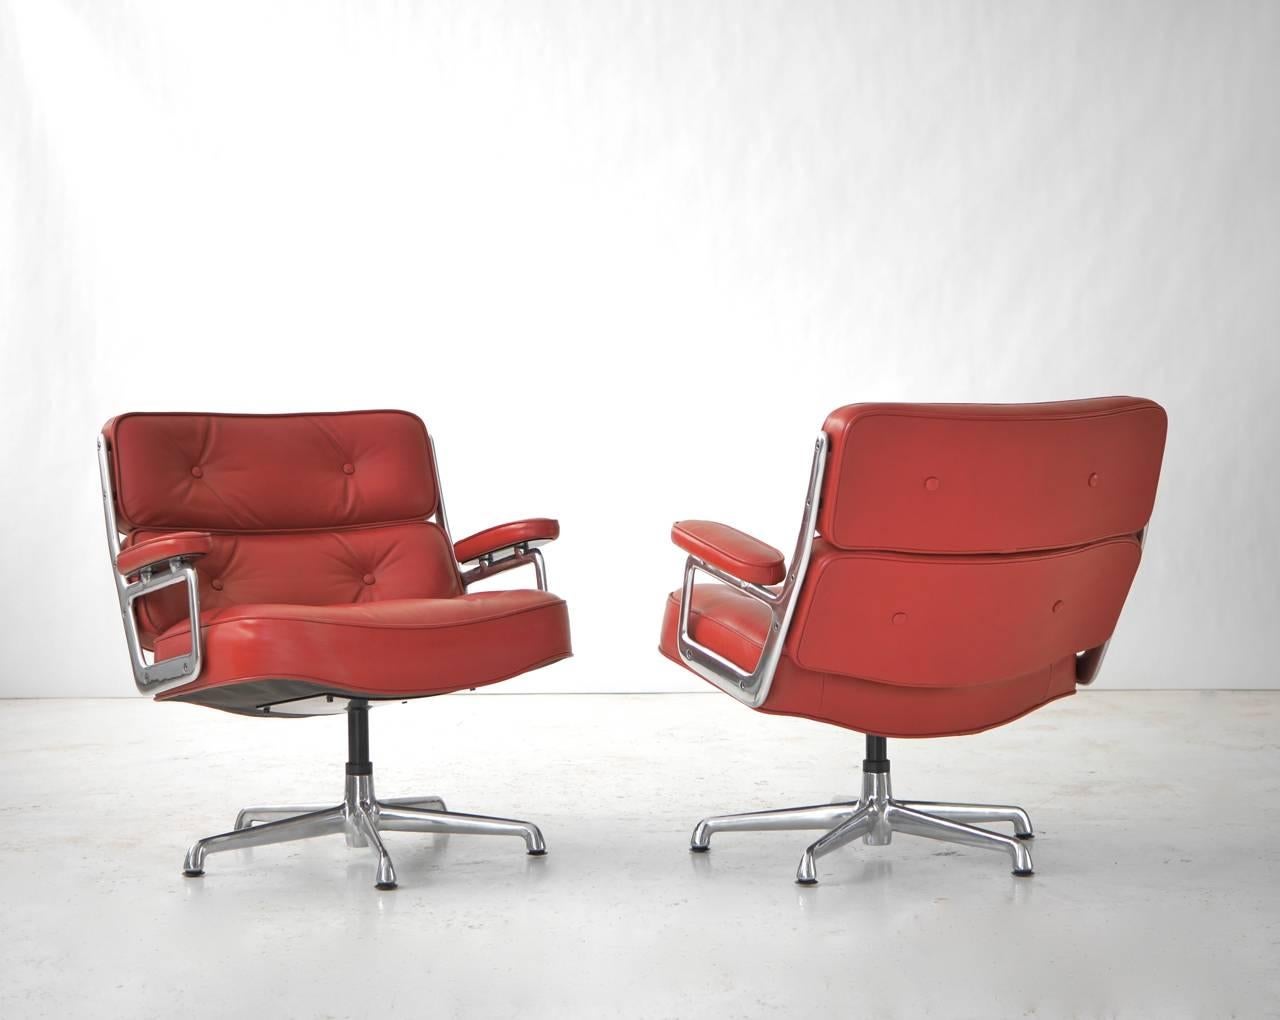 Charles Eames Time Life Leather Lounge Chairs For Sale 2